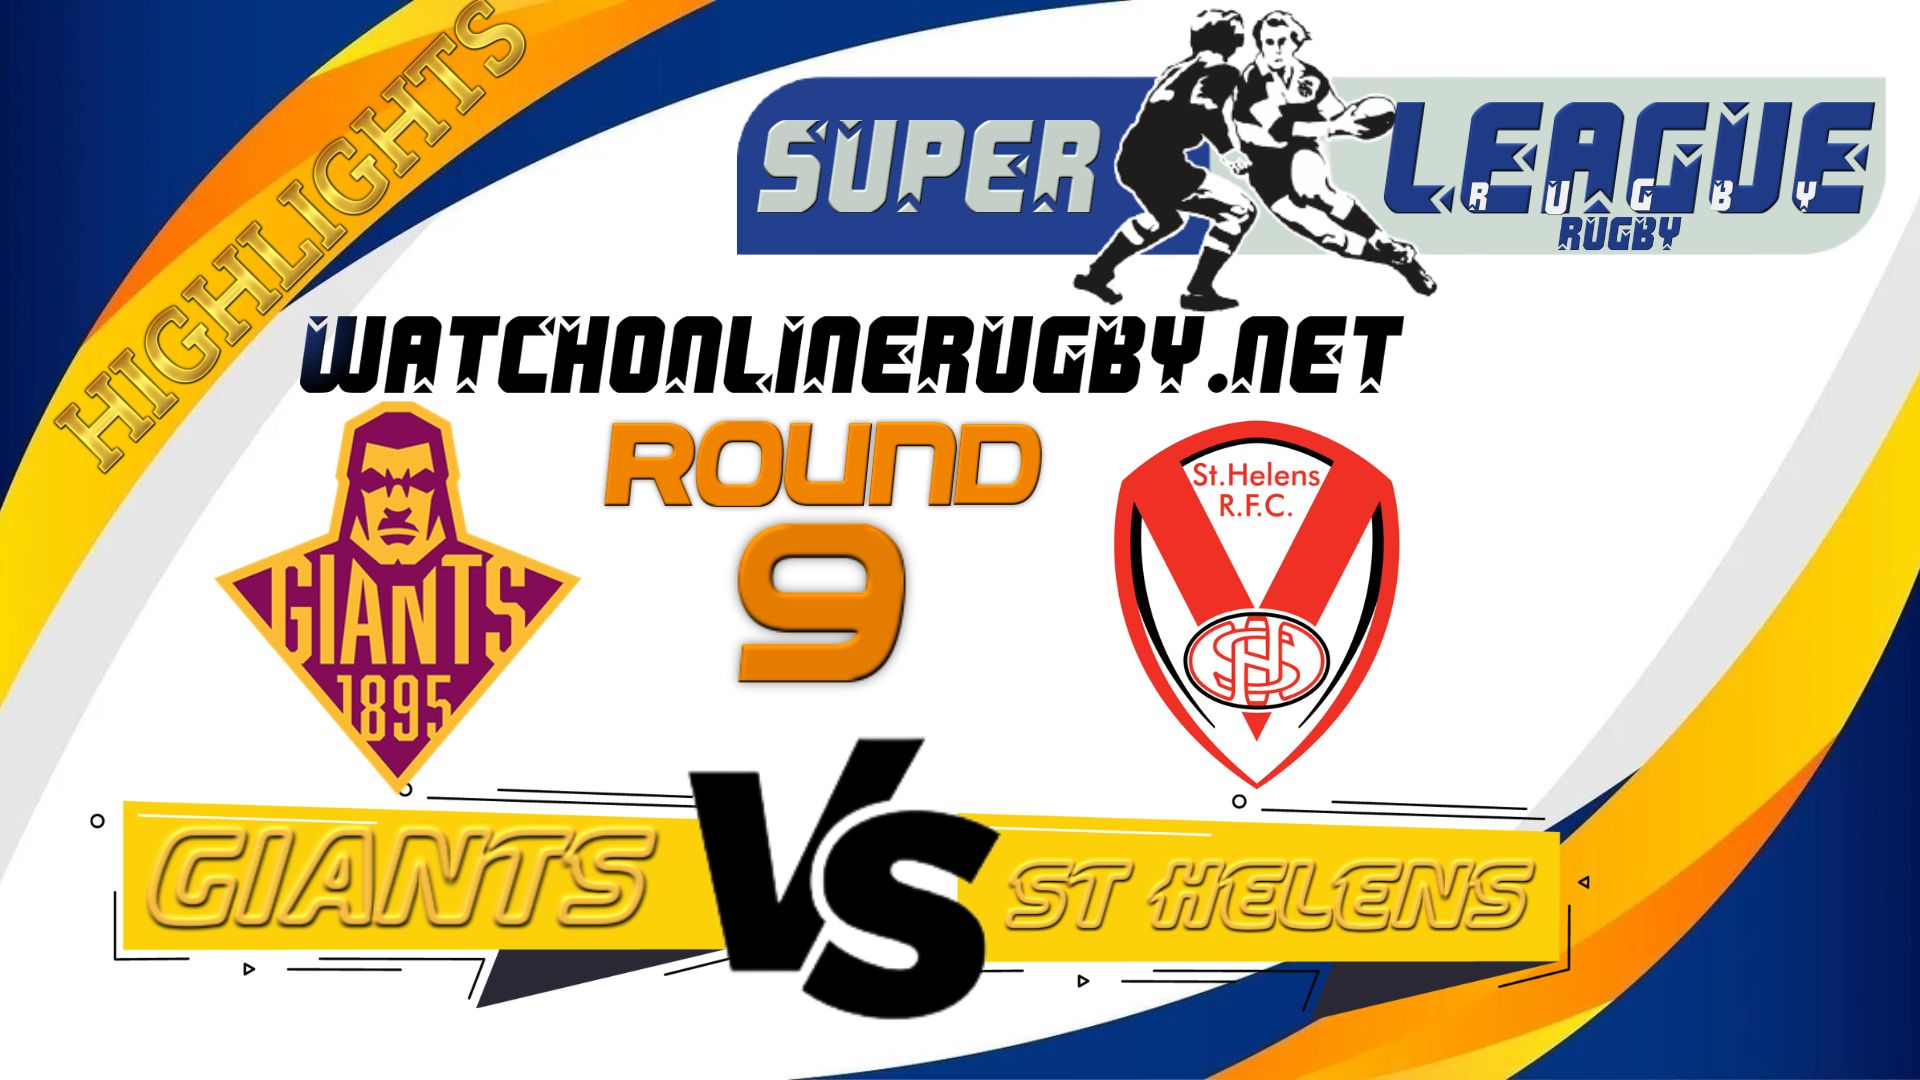 Huddersfield Giants Vs St Helens Super League Rugby 2022 RD 9